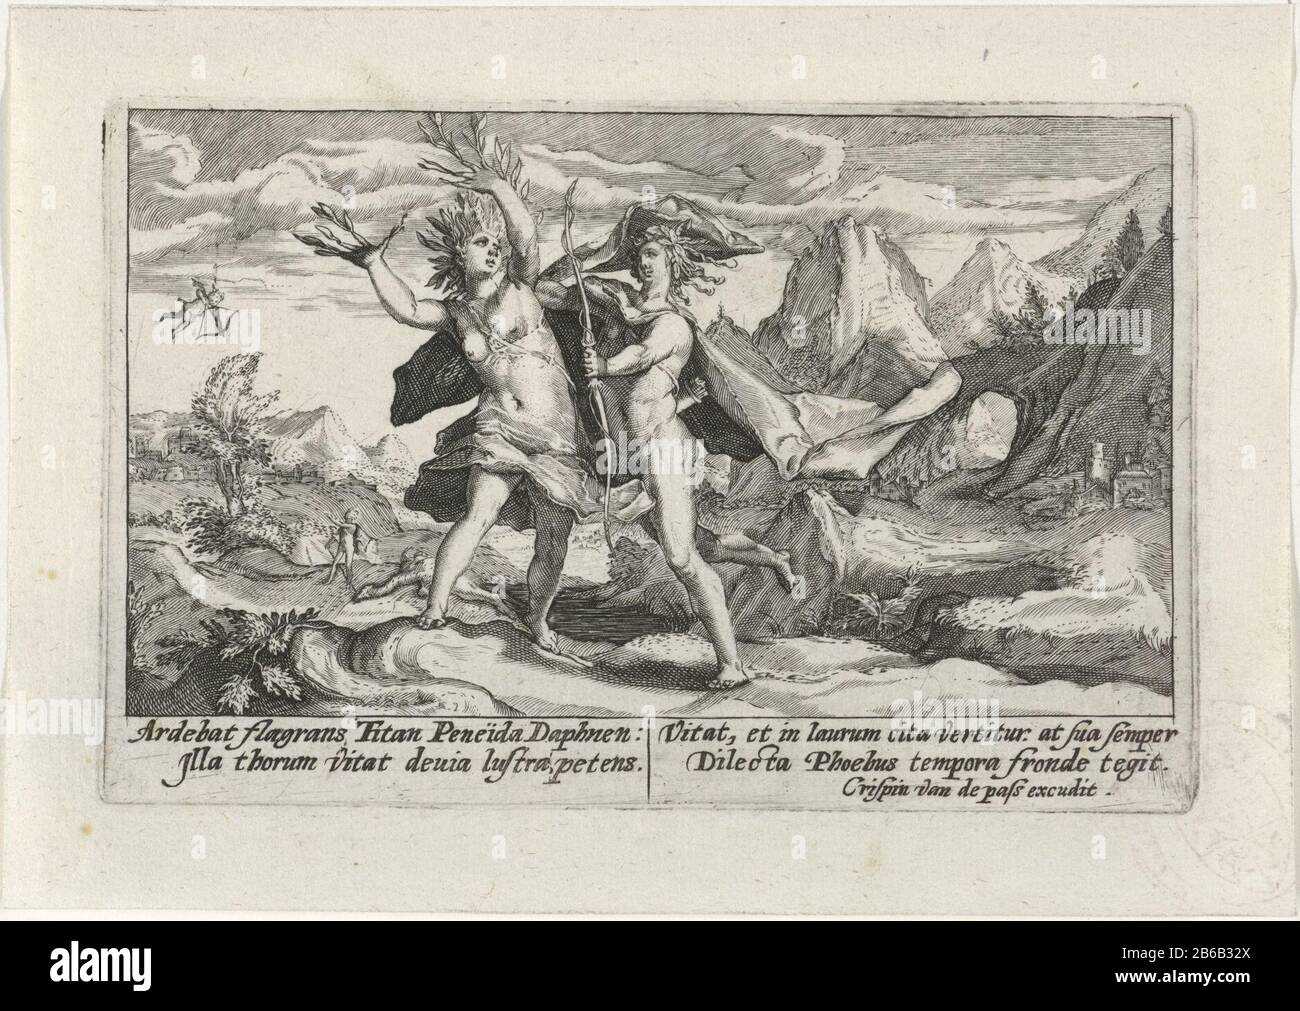 Apollo Chasing Daphne Metamorphoses of Ovid (series title) Apollo chases the fleeing Daphne, by the lead arrow of Cupid, which dispels love is affected. Her arms raised have already branches and leaves and her feet root. In the left background Apollo is struck by a golden arrow of Cupid, which ignites love. In the margin a four-line signature, in two columns, in Latijn. Manufacturer : printmaker: Crispijn of Passe (I) author: Franco Estiusuitgever: Crispijn of Passe (I) (listed building) Place manufacture: Cologne Date: 1602 - 1607 Physical characteristics: engra material: paper Technique: eng Stock Photo